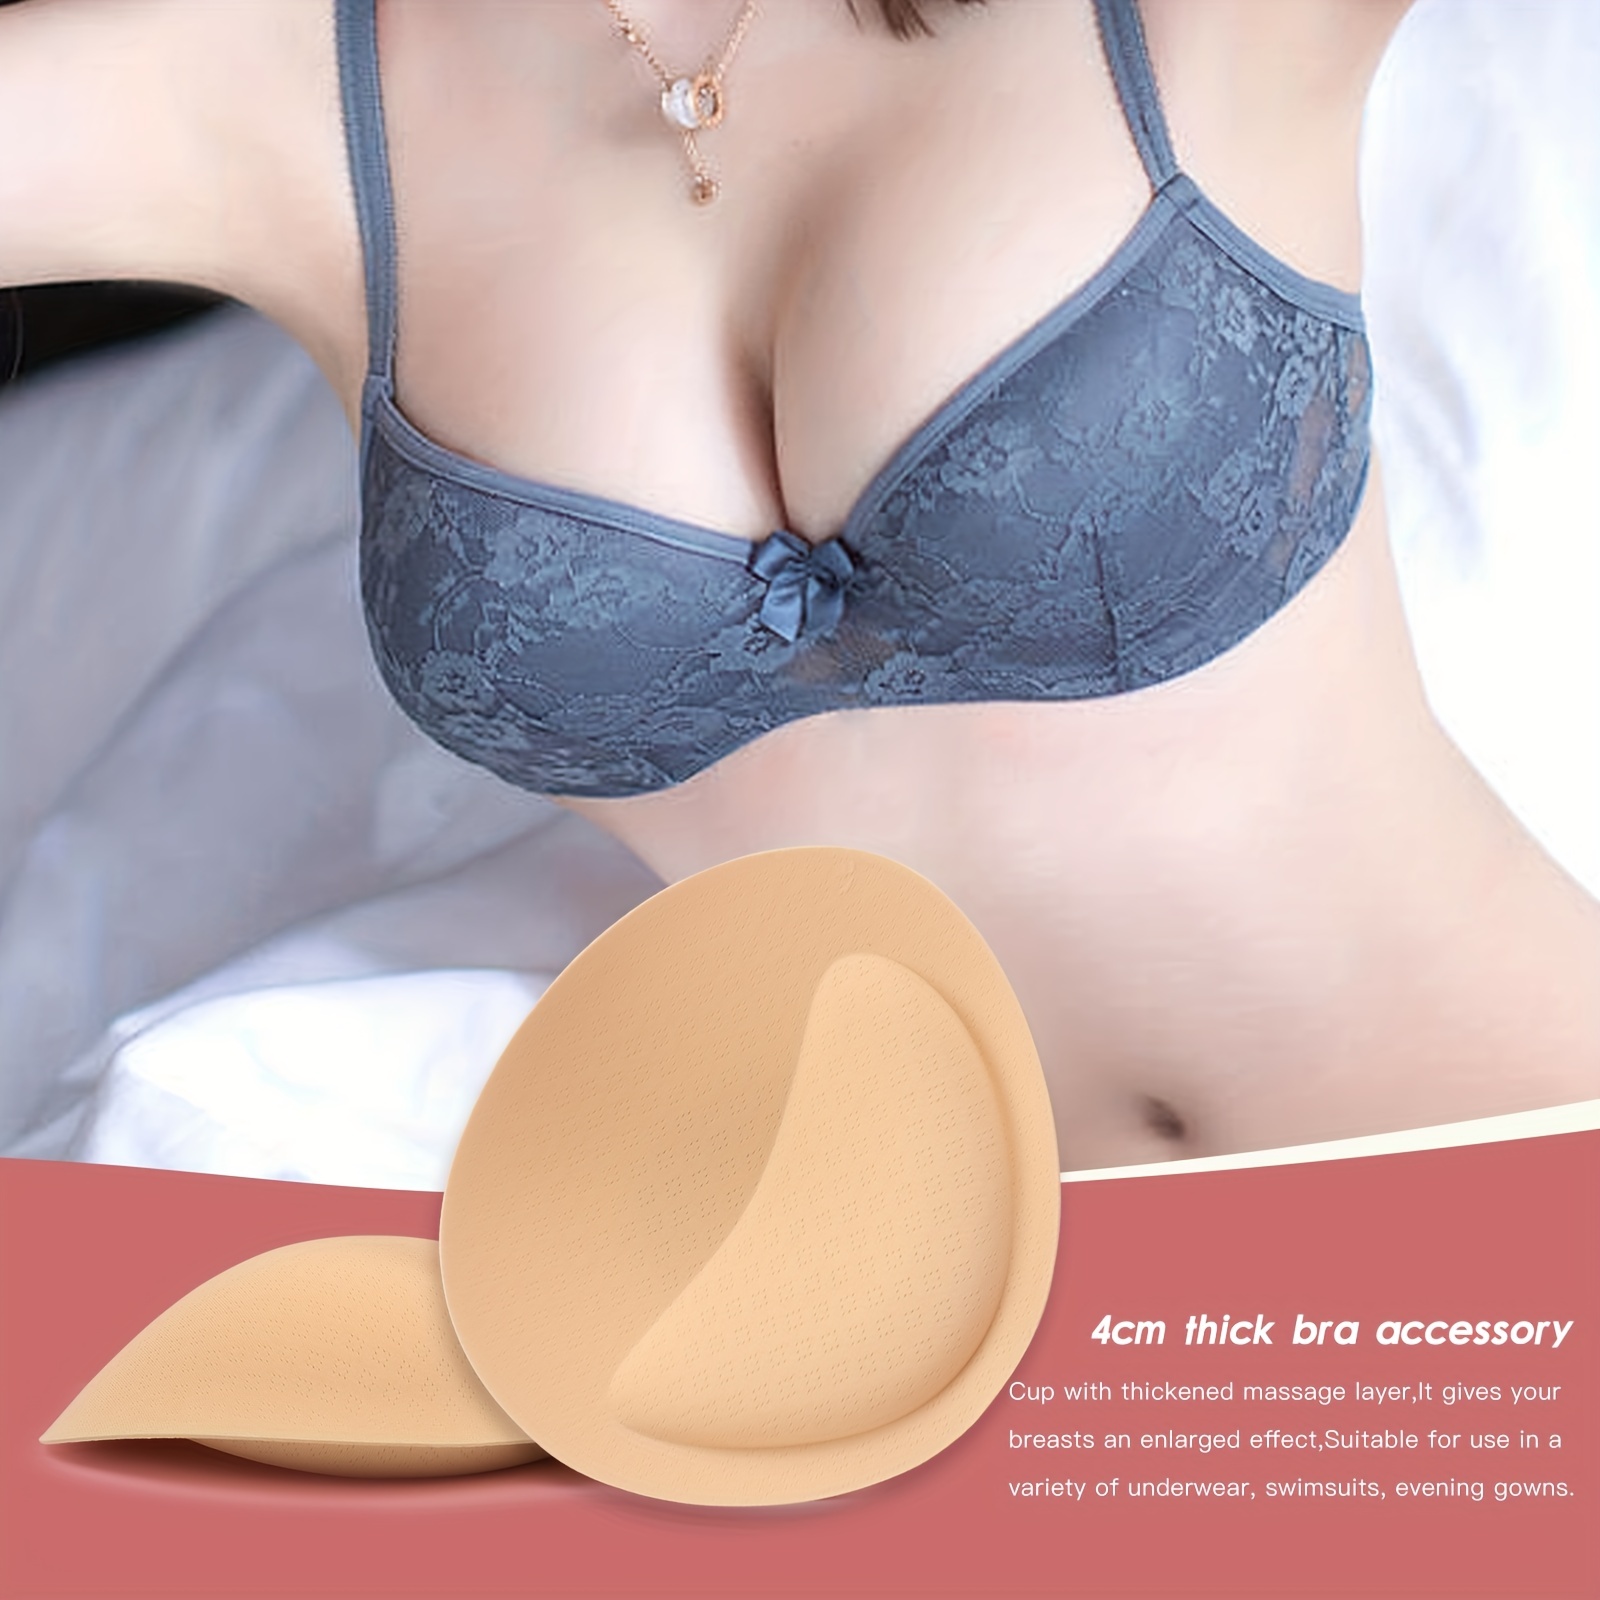 2pcs/set Women's Thin Round Breast Pads Insert Pads For Bra Cups